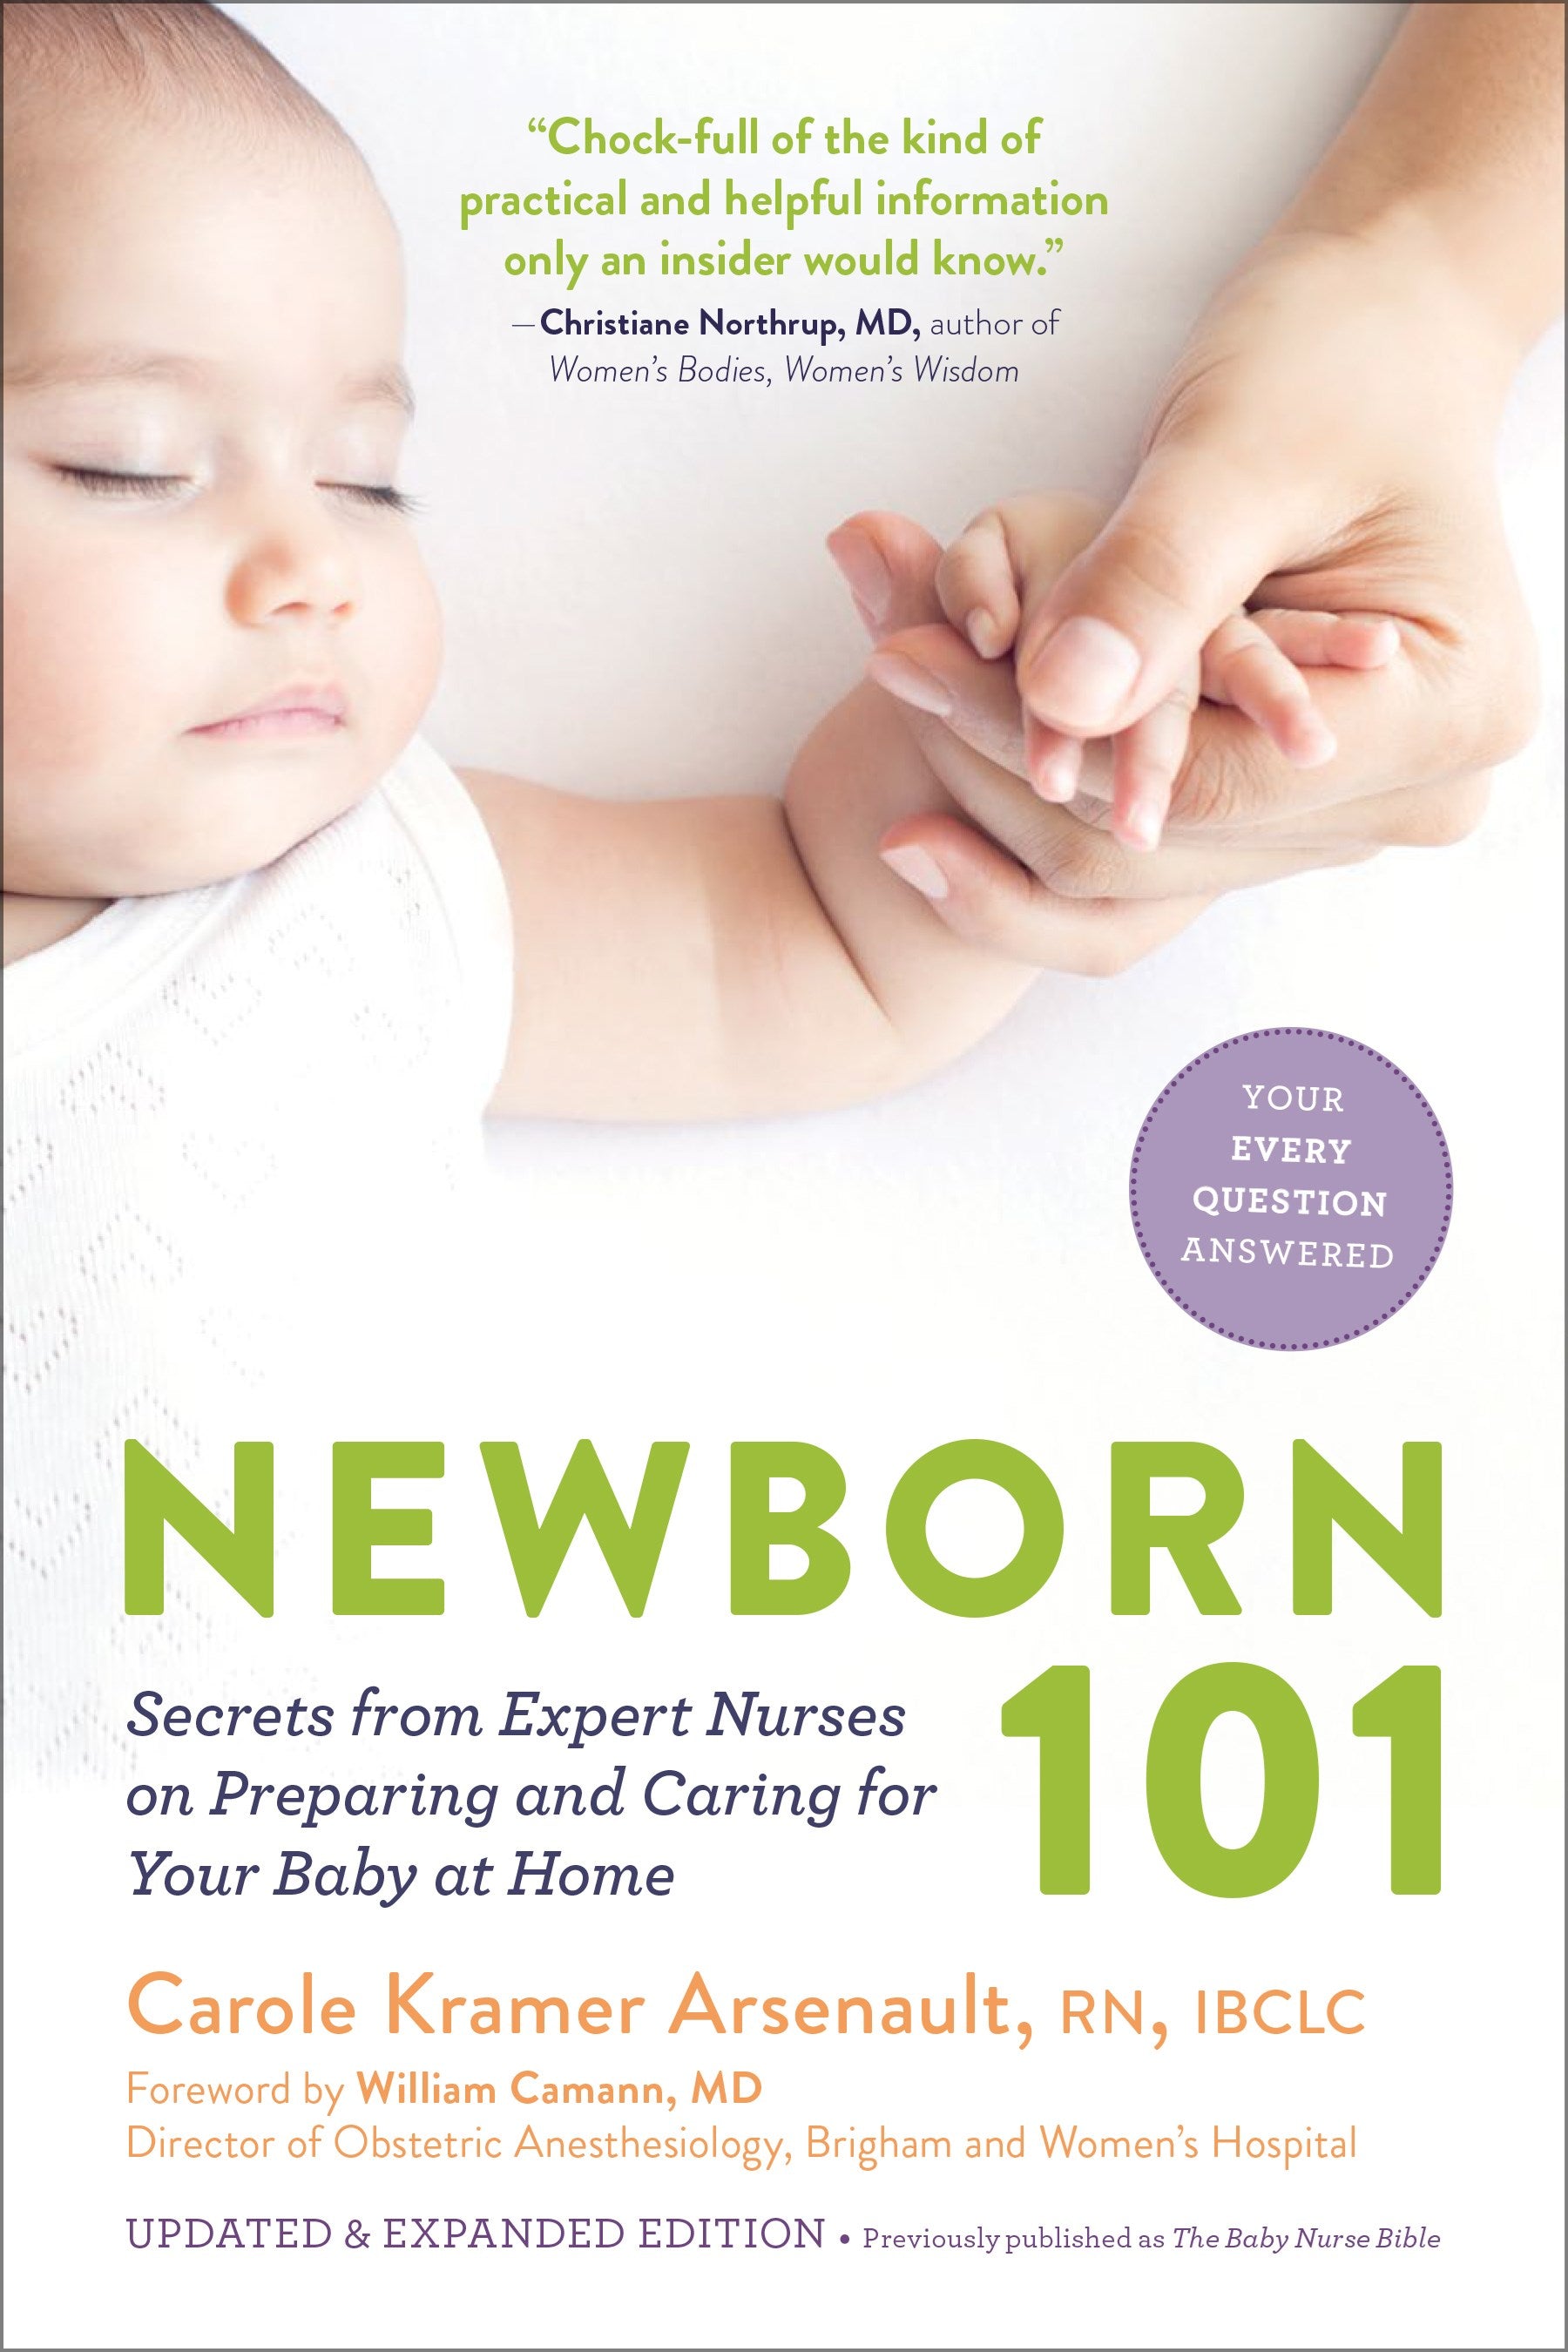 Newborn 101: Secrets from Expert Nurses on Preparing and Caring for Your Baby at Home (2nd Edition, Revised)